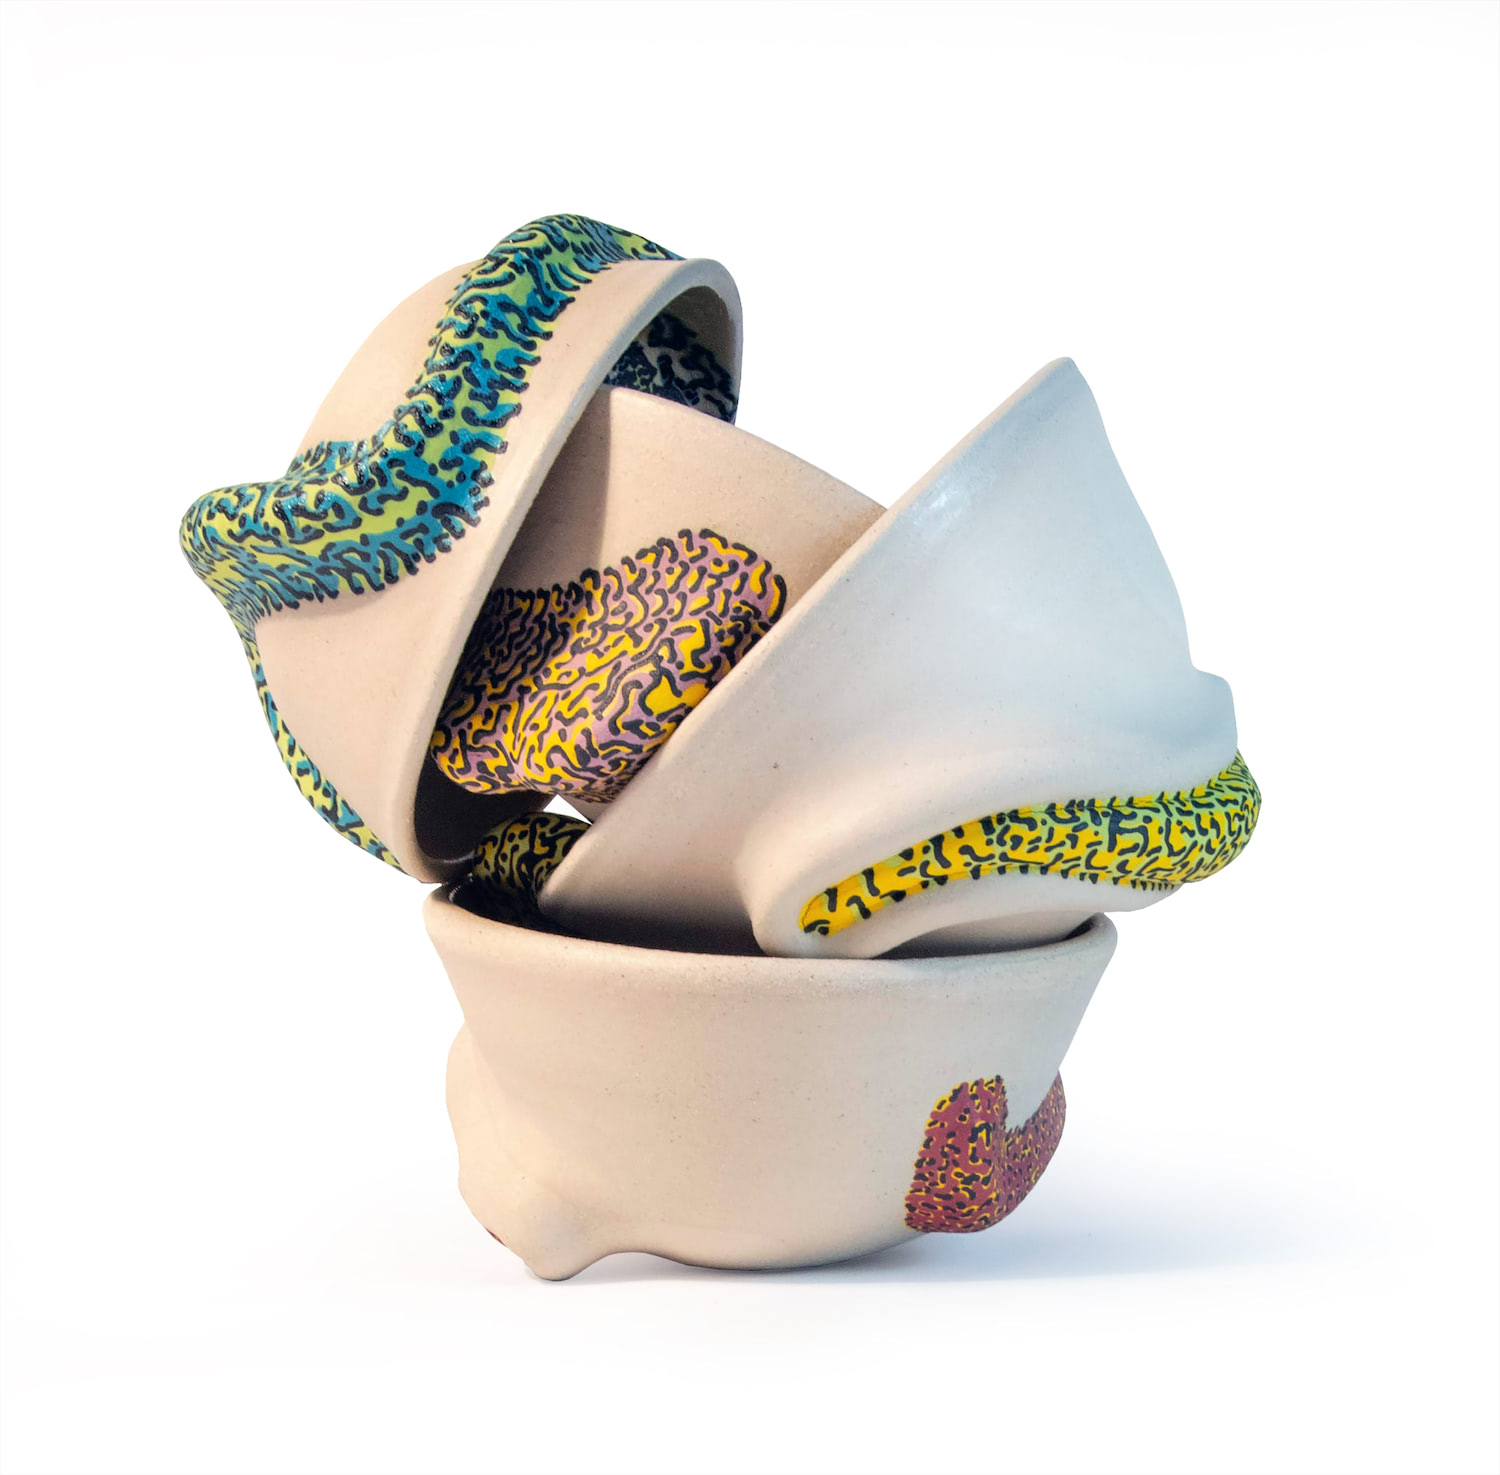 An image of stacked white bowl forms with colorfully patterned sculptural surface additions.